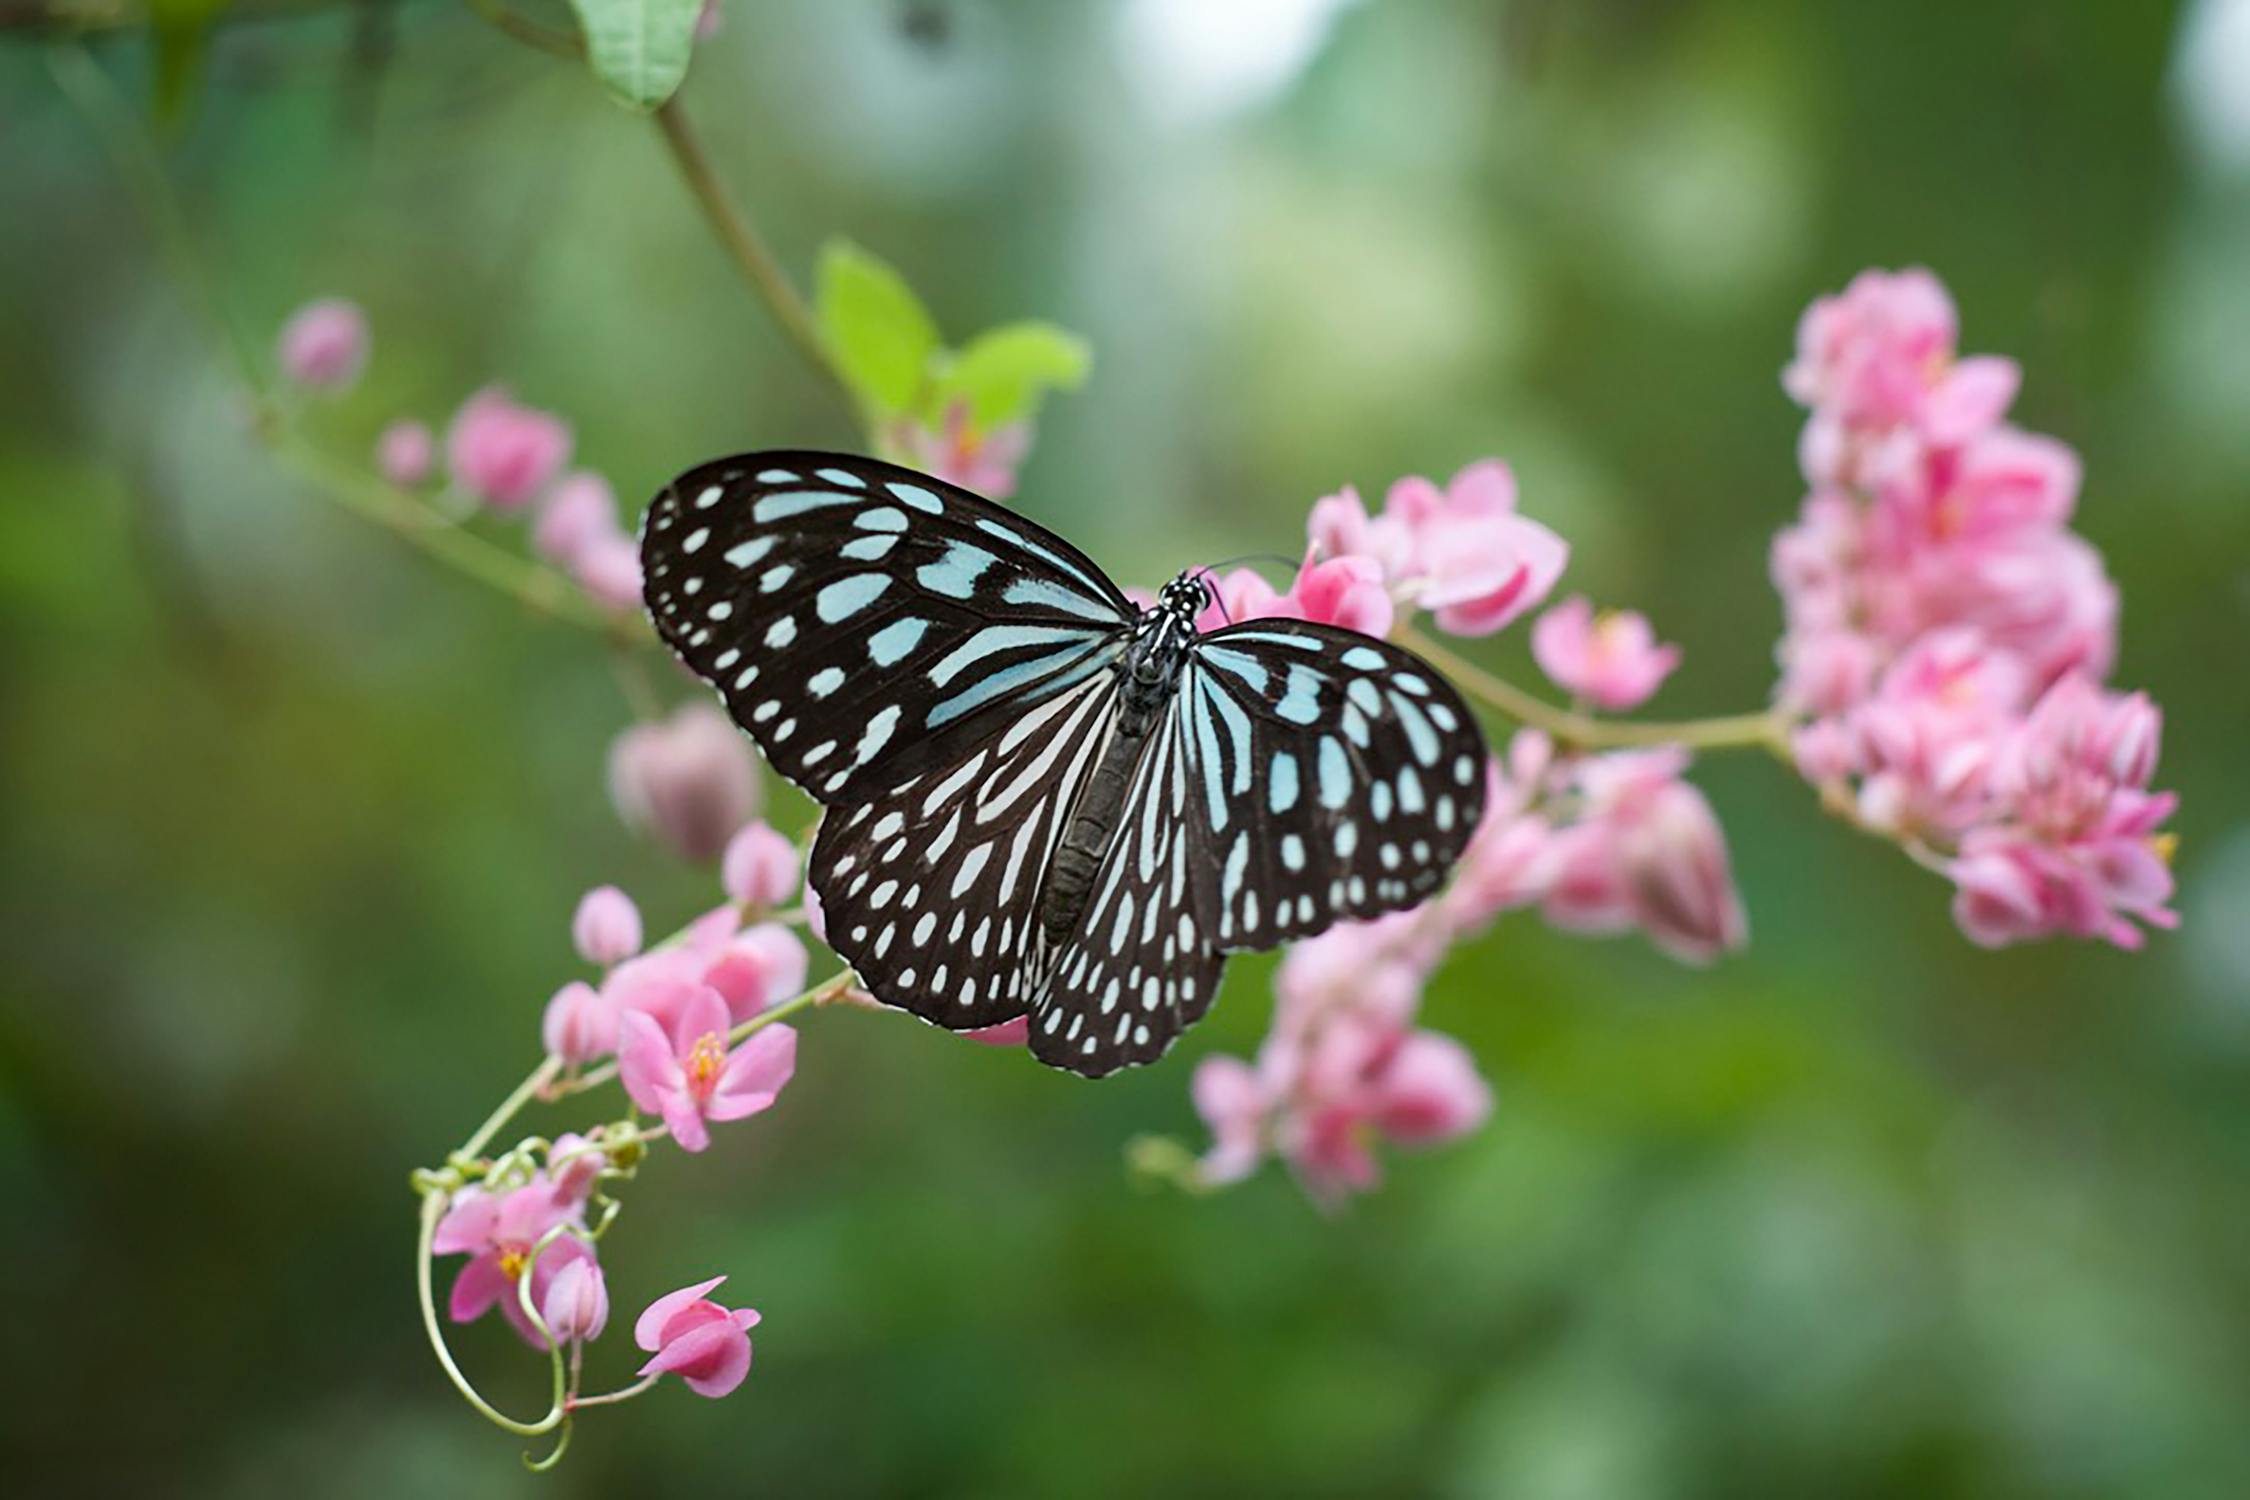 Butterfly Photo by Yulia from Pexels: https://www.pexels.com/photo/macro-photo-of-butterfly-perched-on-pink-flowers-3805975/